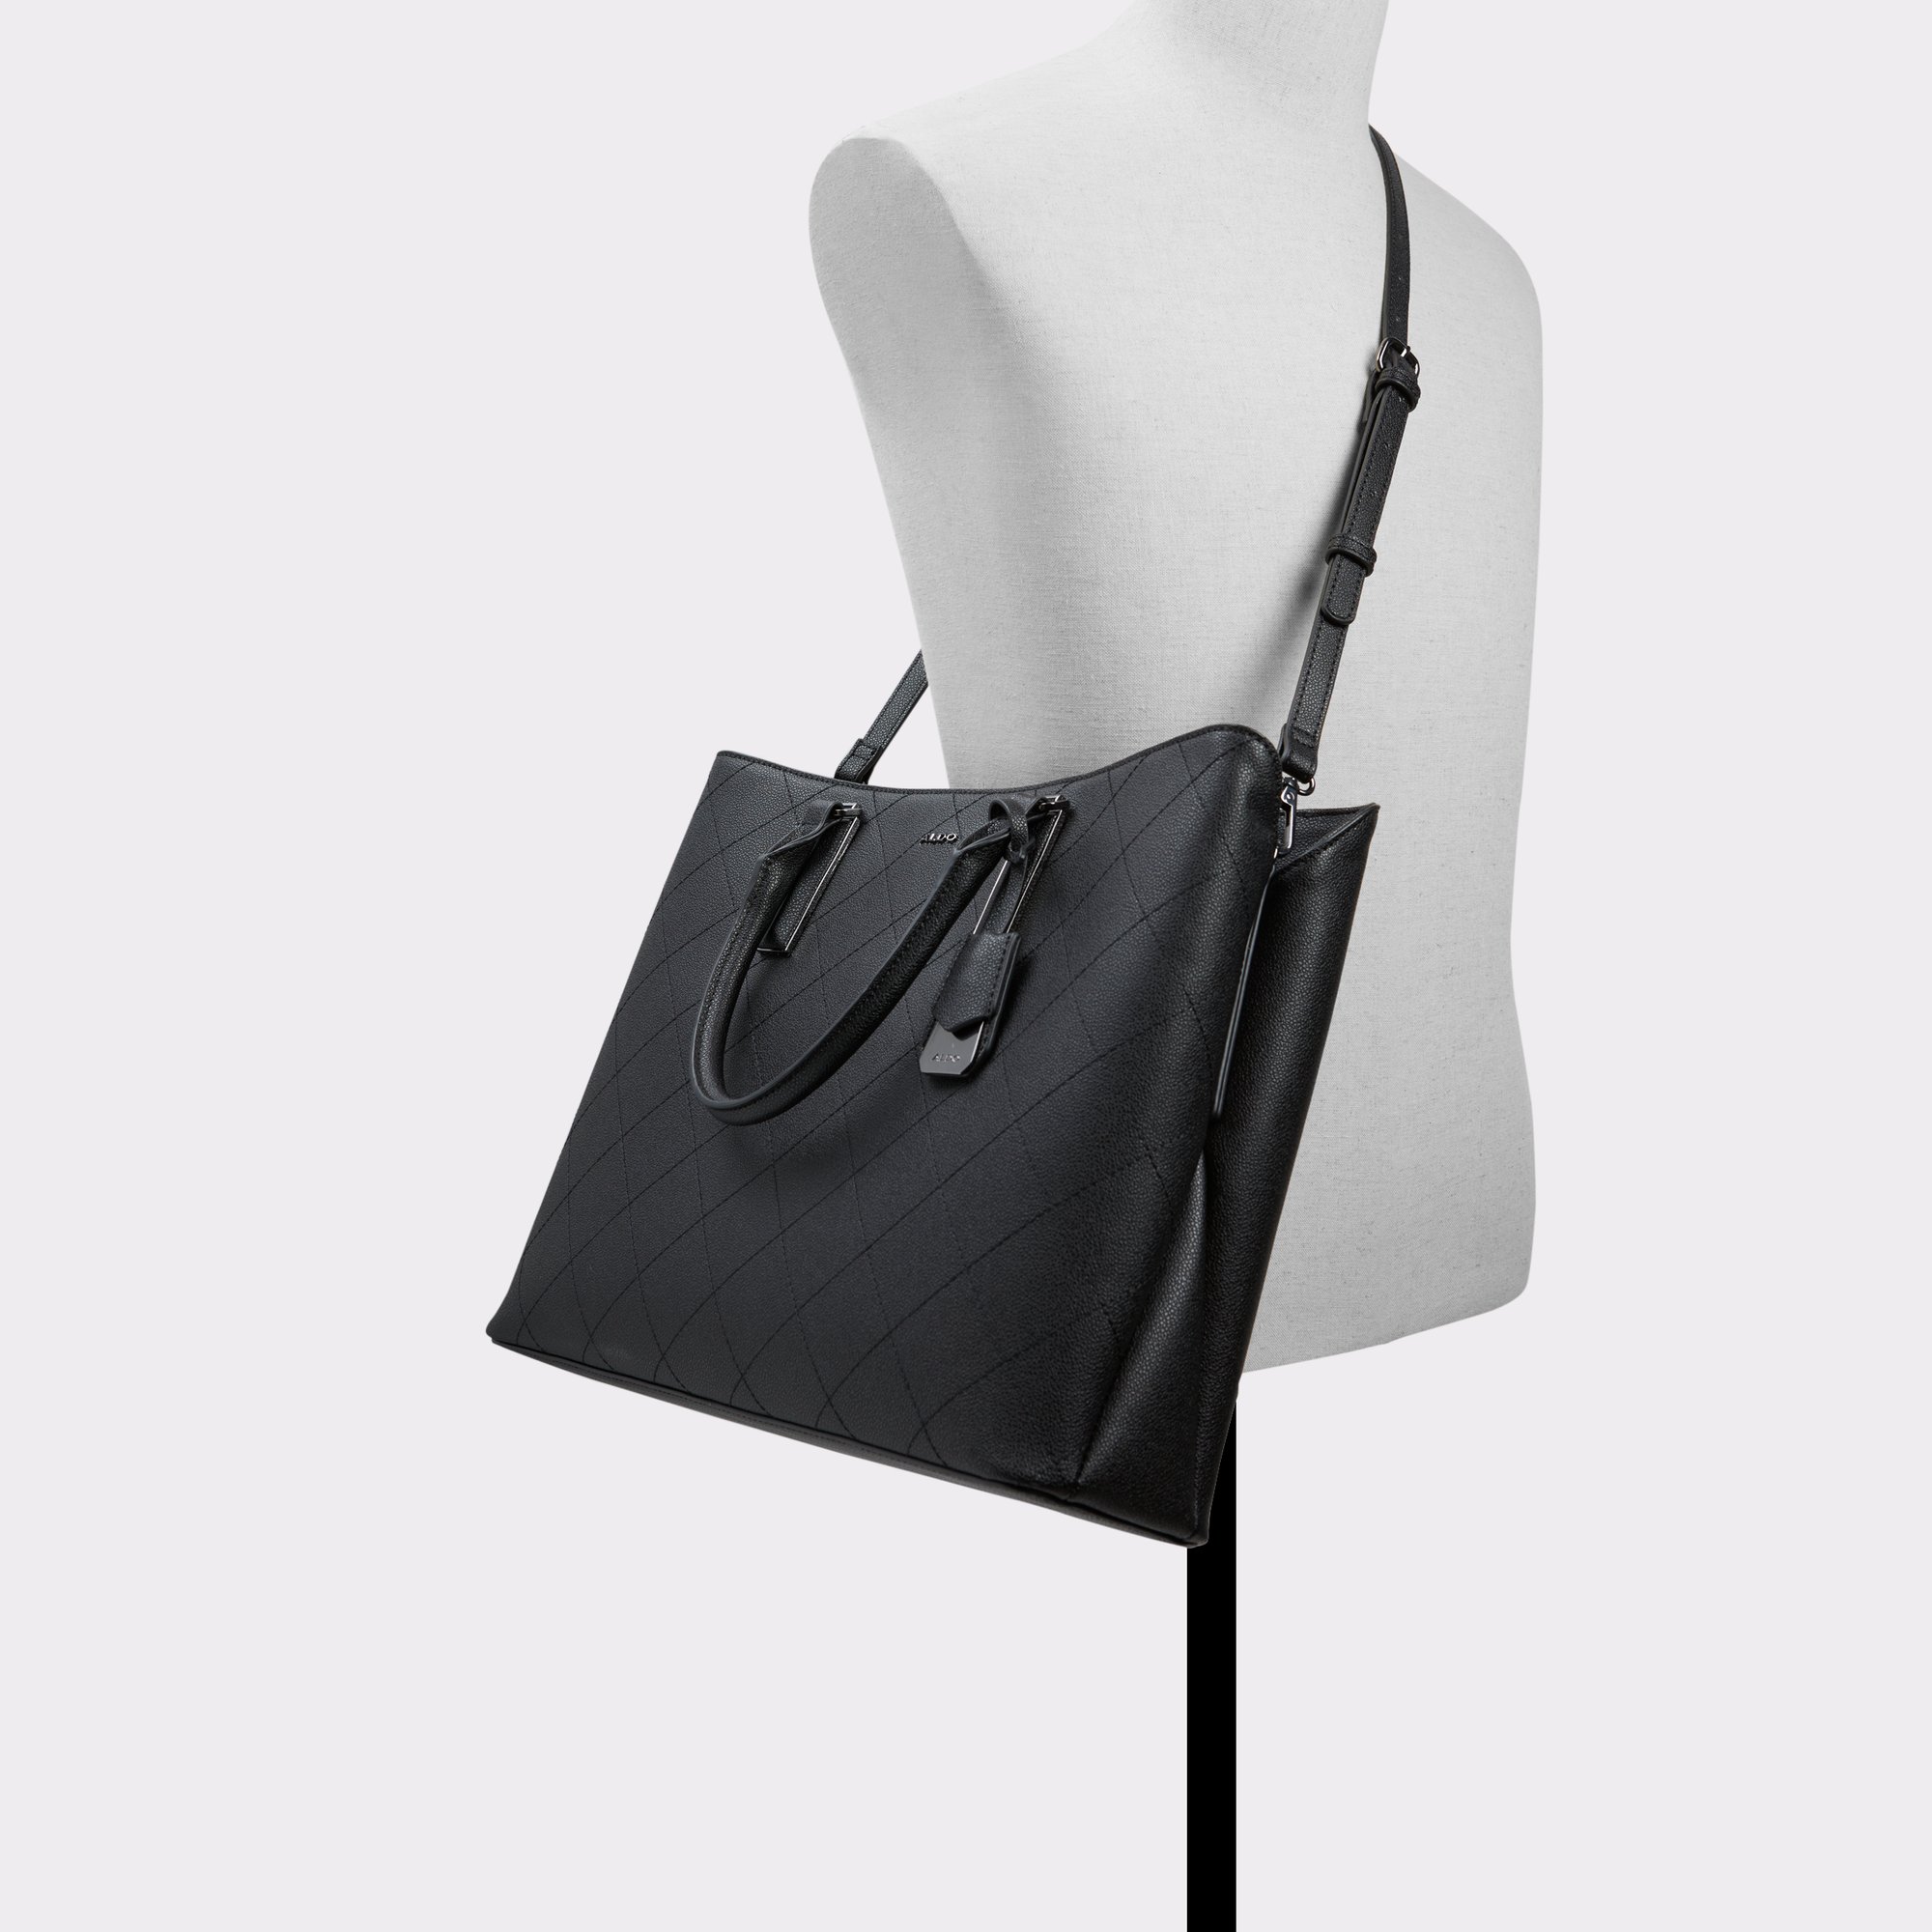 aldo handbag - Tote Bags Prices and Promotions - Women's Bags Oct